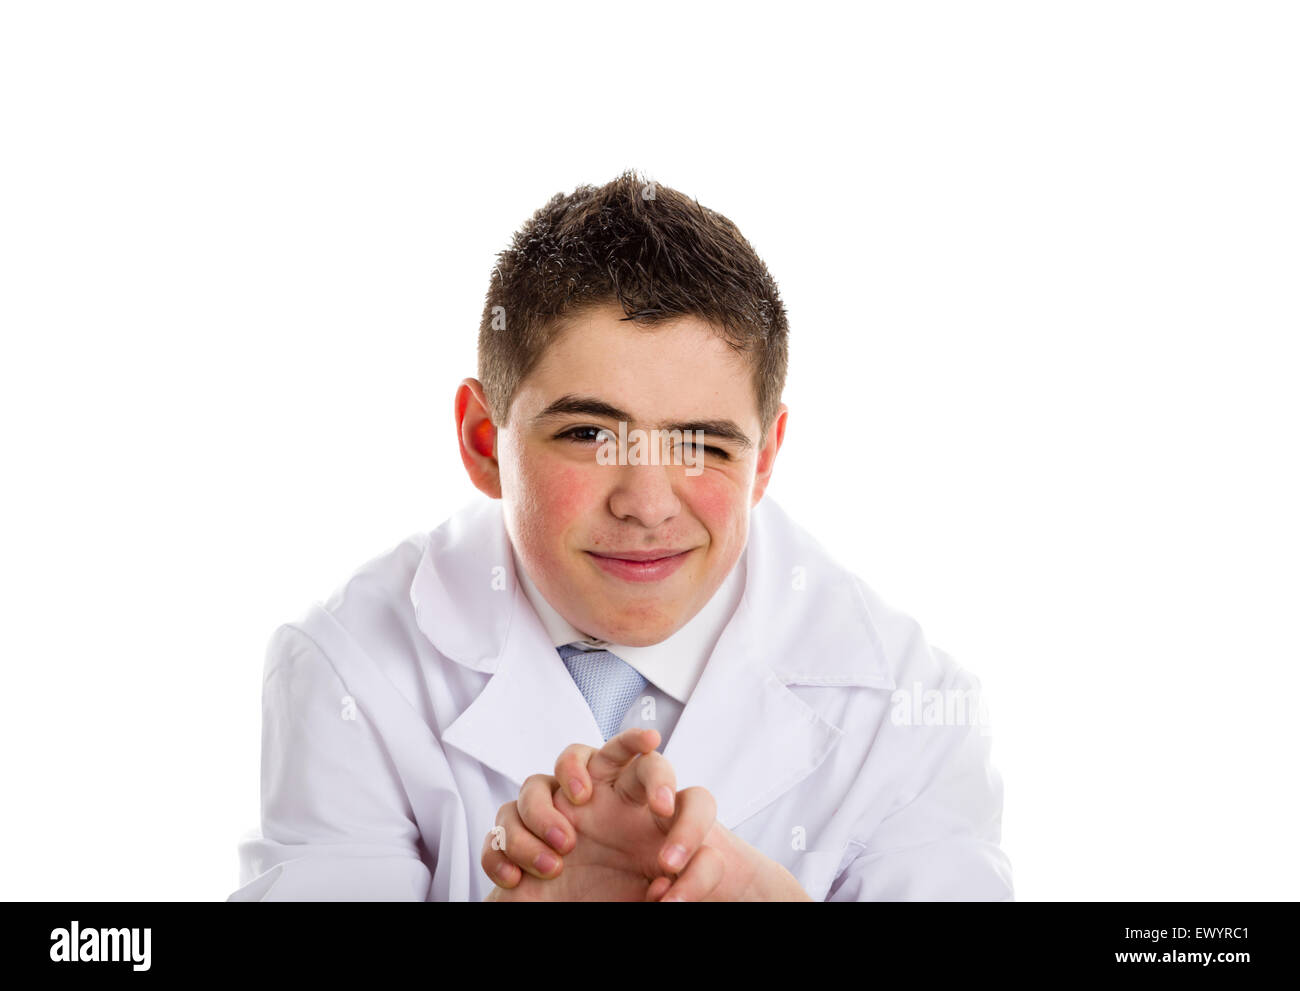 A boy doctor in white coat and blue tie helps to feel medicine more friendly: he is stretching his arms.. His acne skin has not ben retouched Stock Photo